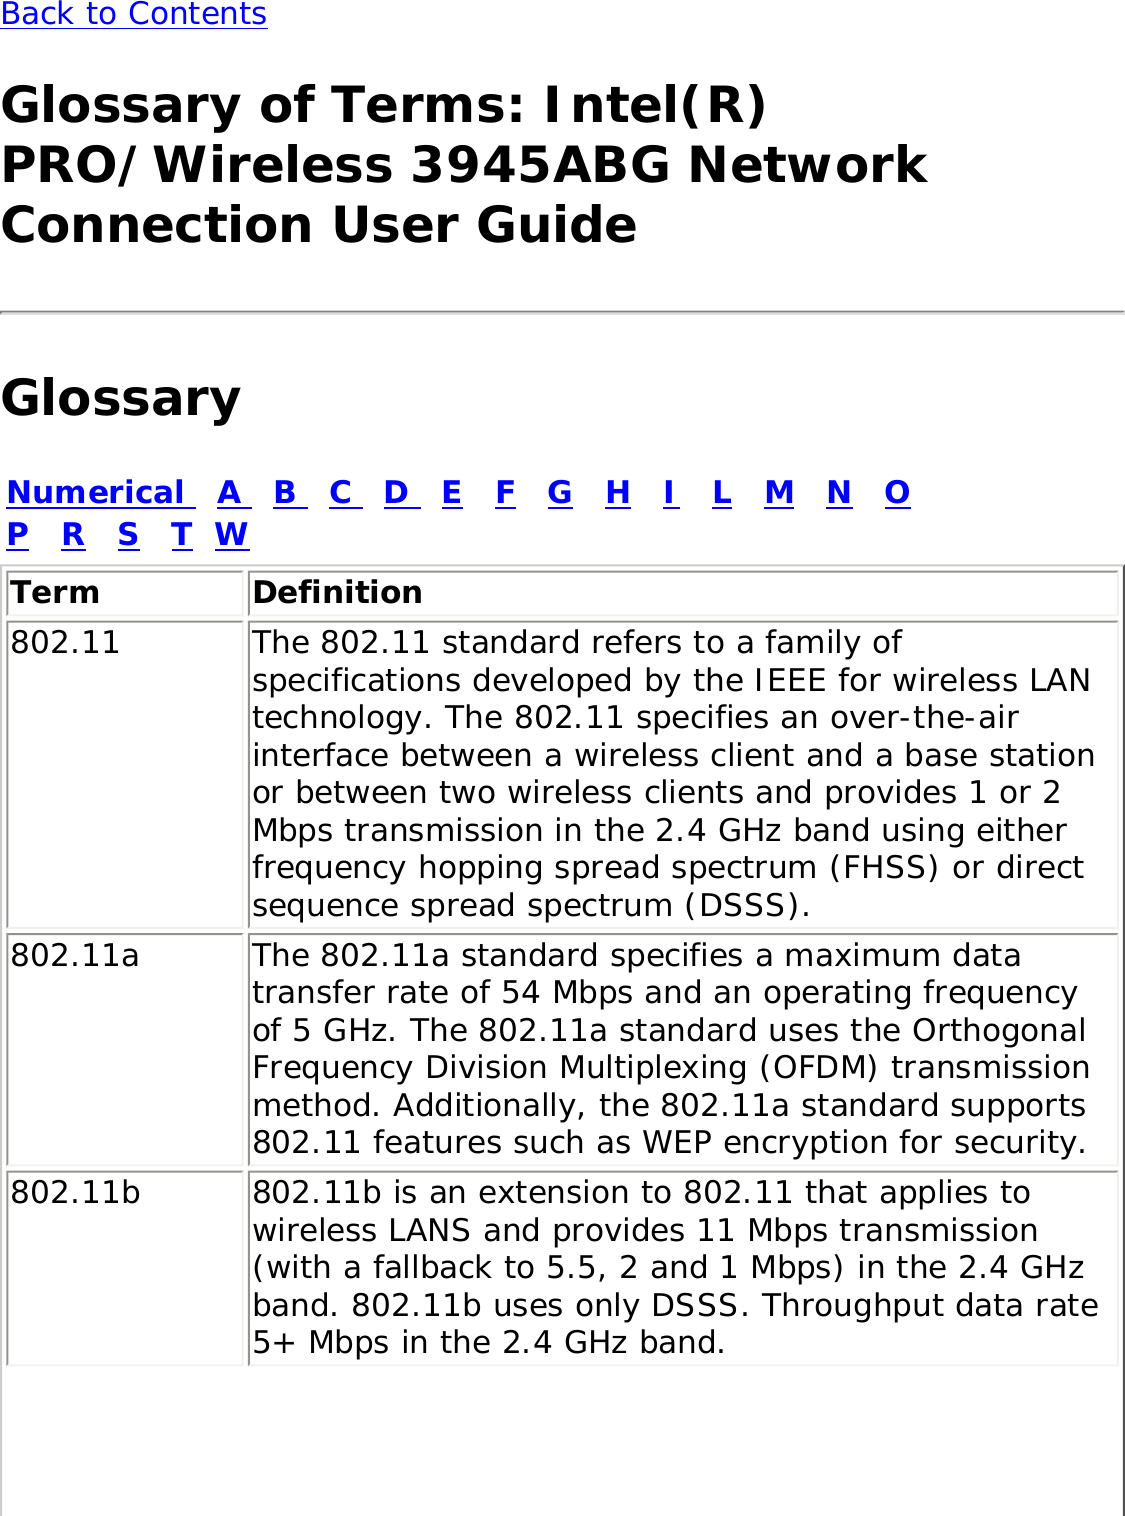 Back to Contents Glossary of Terms: Intel(R) PRO/Wireless 3945ABG Network Connection User GuideGlossaryNumerical   A   B   C   D   E   F   G   H   I   L   M   N   O   P   R   S   T  WTerm Definition802.11 The 802.11 standard refers to a family of specifications developed by the IEEE for wireless LAN technology. The 802.11 specifies an over-the-air interface between a wireless client and a base station or between two wireless clients and provides 1 or 2 Mbps transmission in the 2.4 GHz band using either frequency hopping spread spectrum (FHSS) or direct sequence spread spectrum (DSSS).802.11a The 802.11a standard specifies a maximum data transfer rate of 54 Mbps and an operating frequency of 5 GHz. The 802.11a standard uses the Orthogonal Frequency Division Multiplexing (OFDM) transmission method. Additionally, the 802.11a standard supports 802.11 features such as WEP encryption for security.802.11b 802.11b is an extension to 802.11 that applies to wireless LANS and provides 11 Mbps transmission (with a fallback to 5.5, 2 and 1 Mbps) in the 2.4 GHz band. 802.11b uses only DSSS. Throughput data rate 5+ Mbps in the 2.4 GHz band.